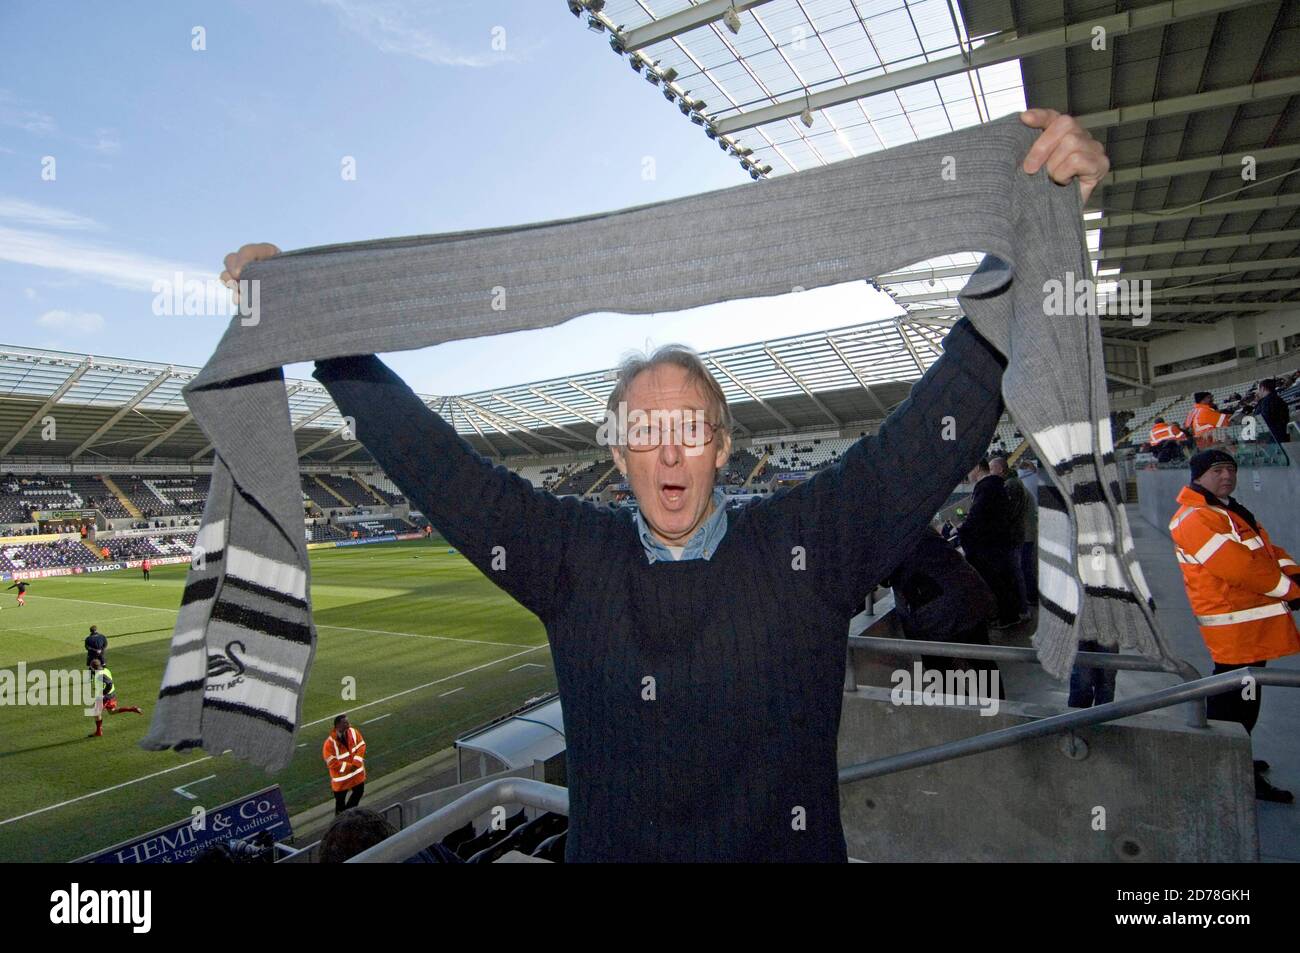 Spencer Davis returns to his roots in Swansea to watch a football match at the Liberty Stadium in Swansea on 6th Feb 2010. Stock Photo